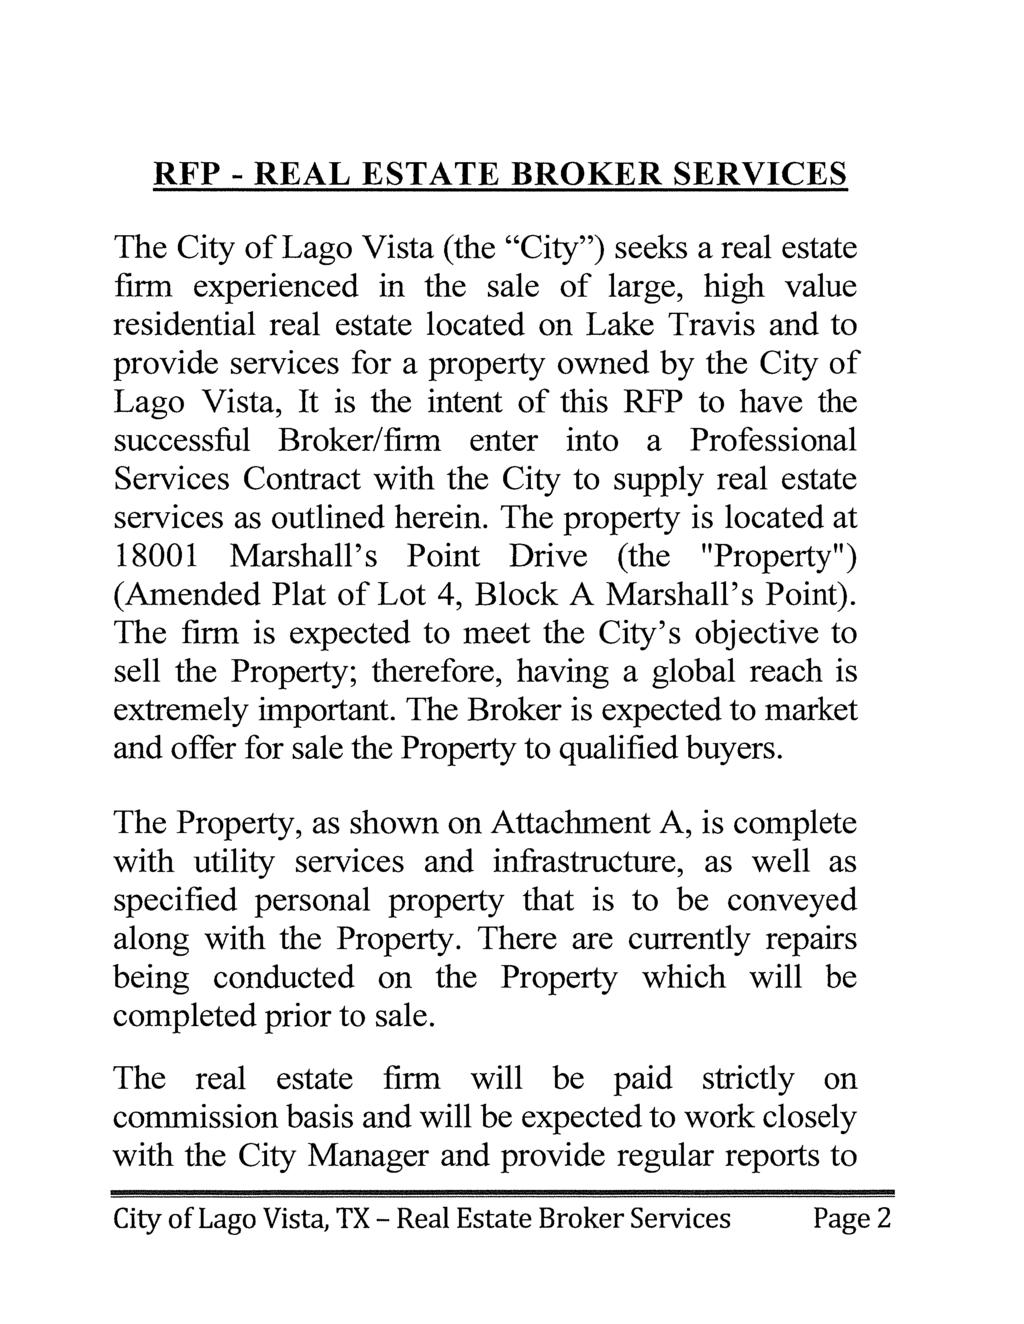 RFP - REAL ESTATE BROKER SERVICES The City of Lago Vista (the "City") seeks a real estate firm experienced in the sale of large, high value residential real estate located on Lake Travis and to